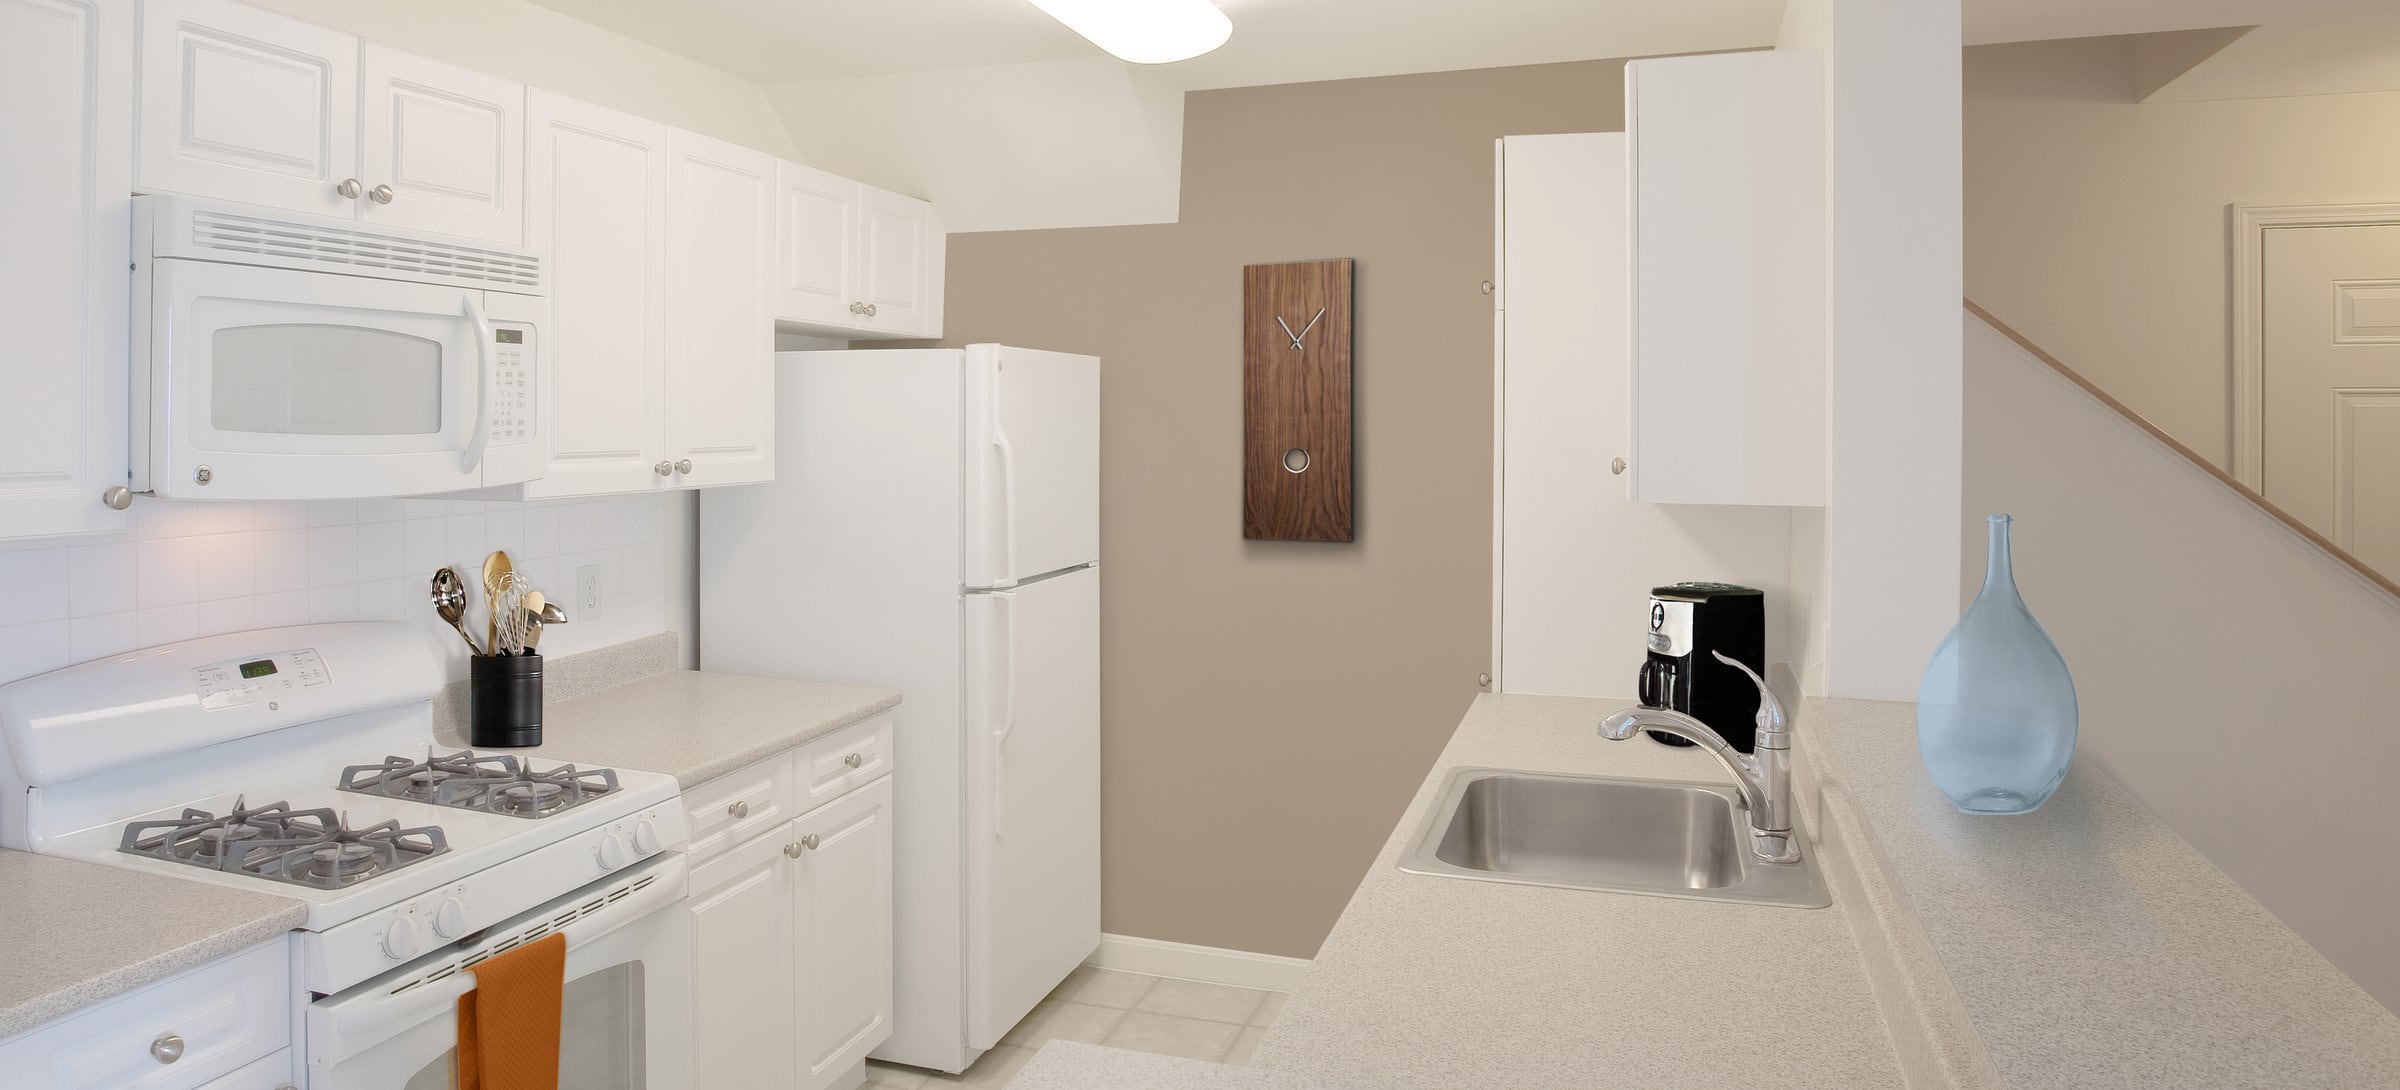 Phase I Classic Package I kitchen with white cabinetry and white appliances 